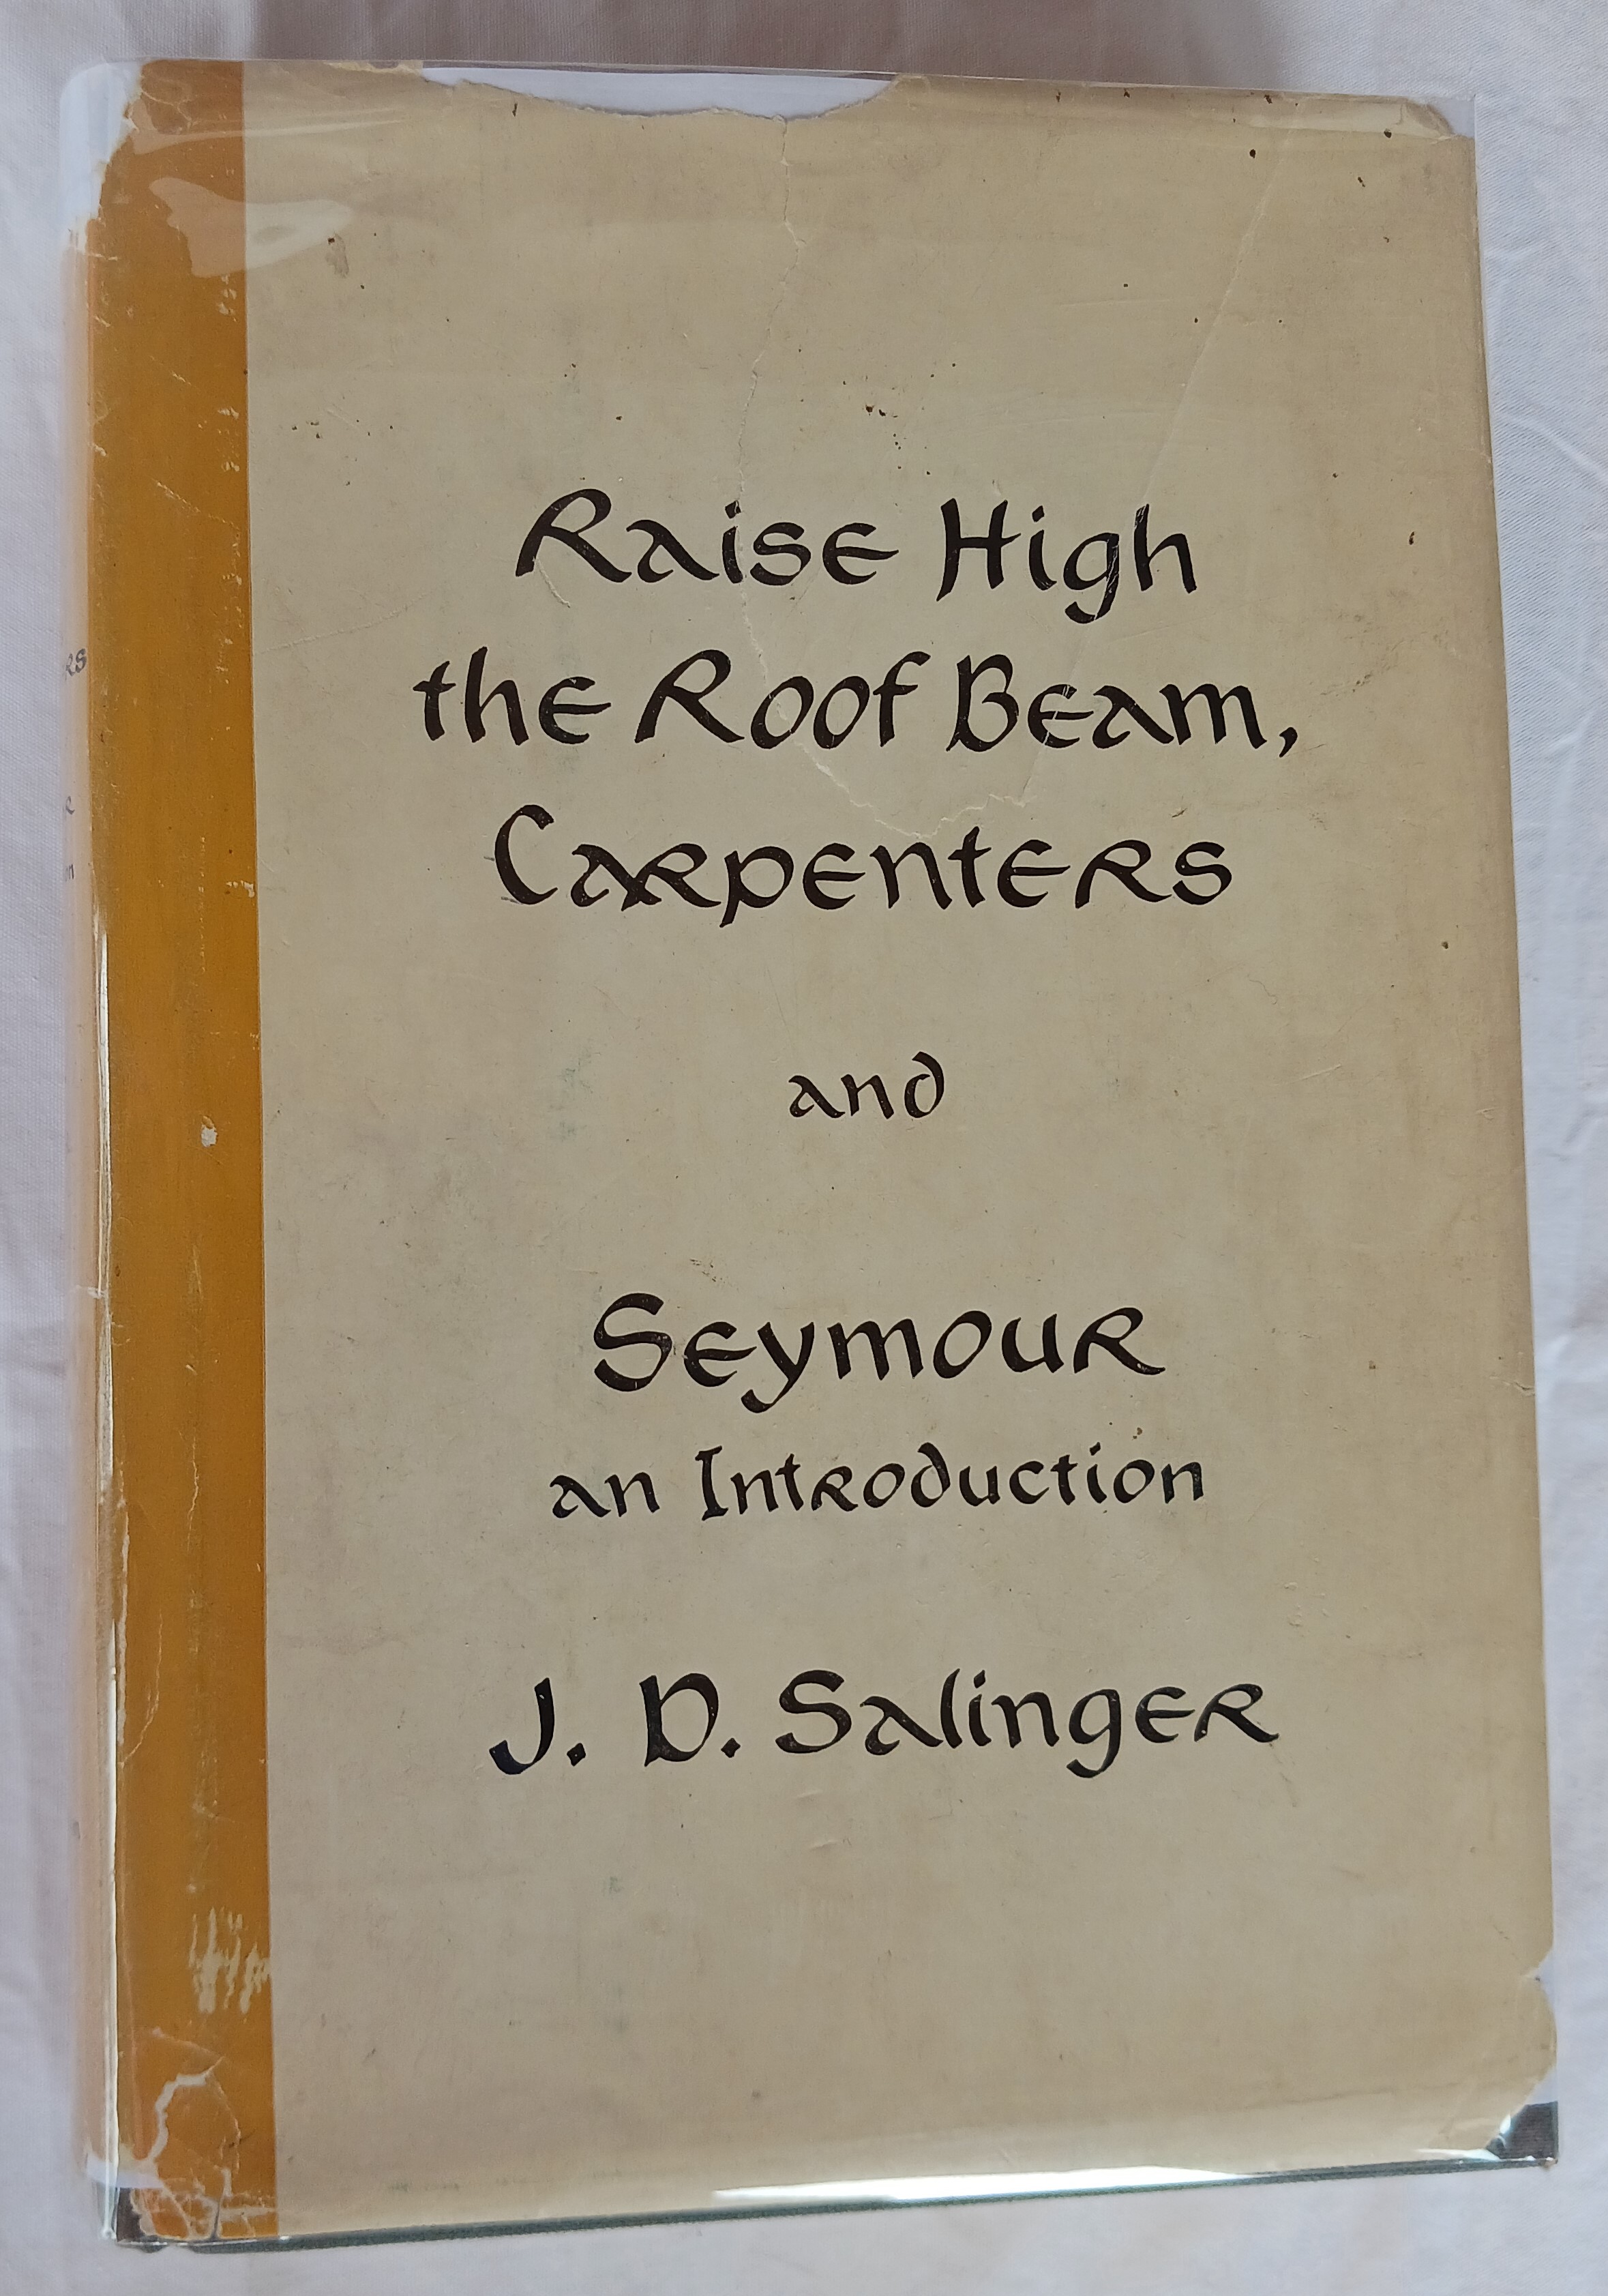 The Catcher in the Rye by J D Salinger Signet Books 1963 